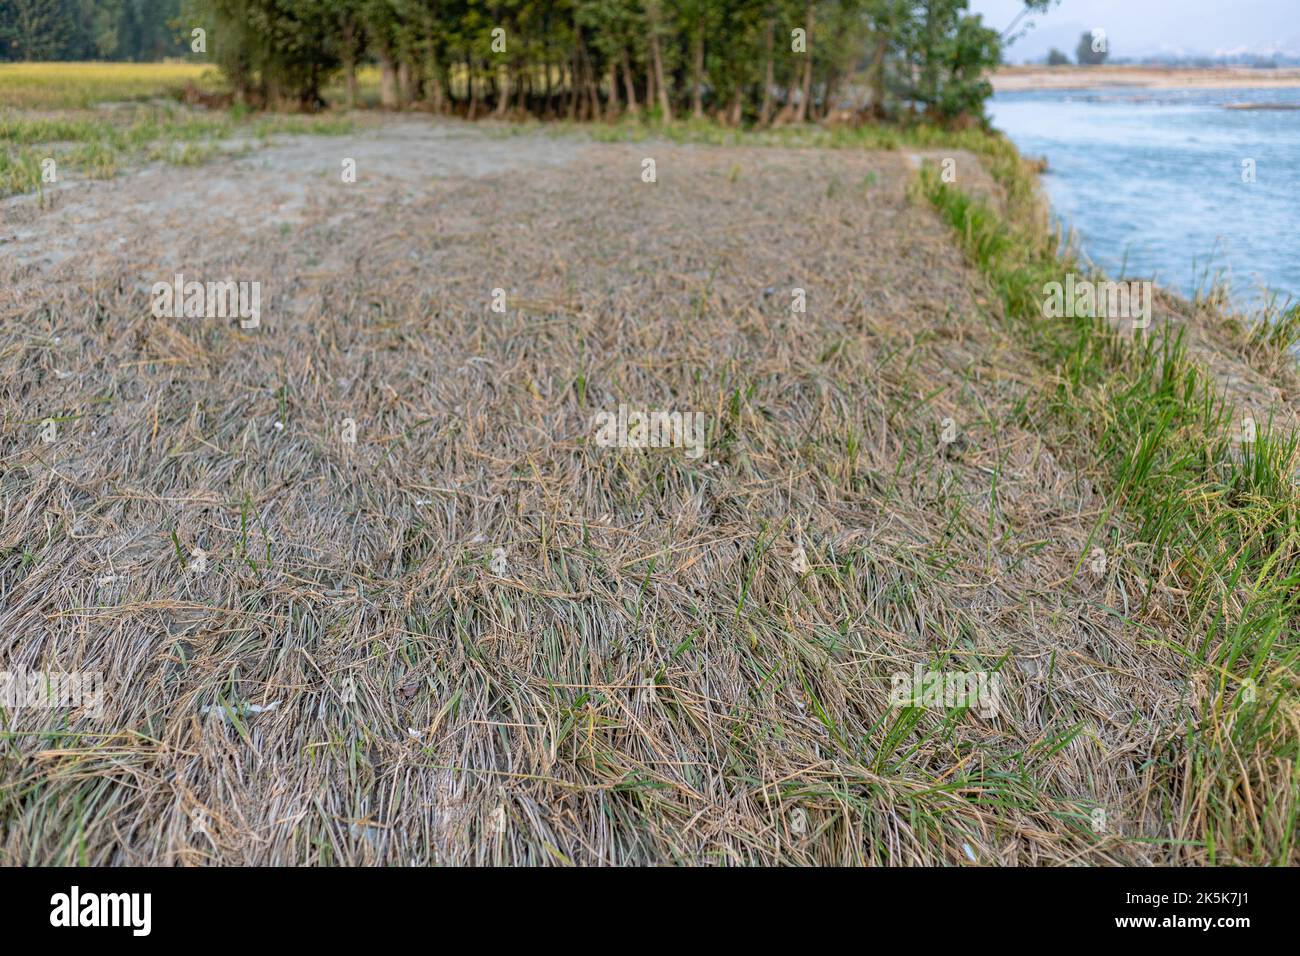 Rice crop buried in mud after heavy flooding in the river Stock Photo